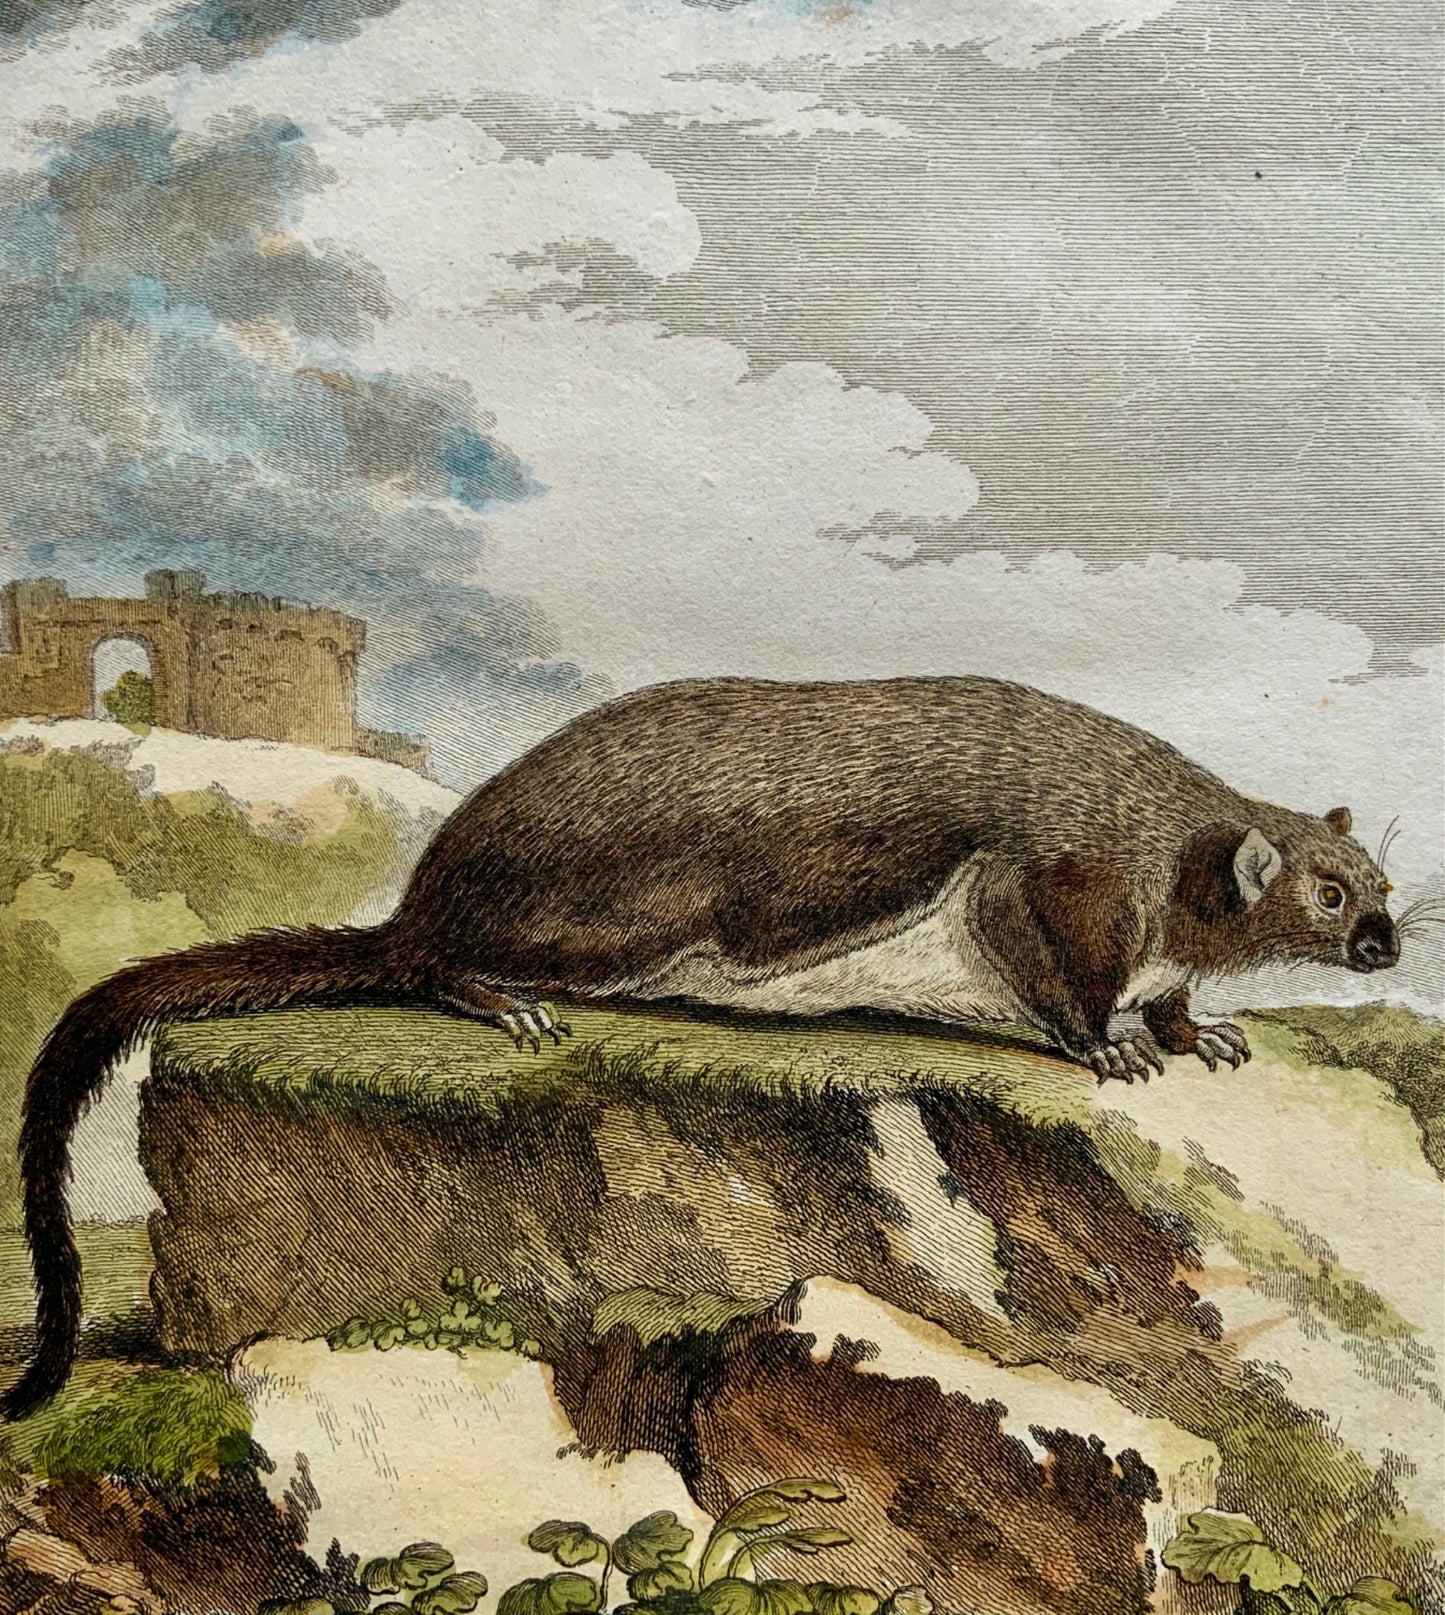 1766 De Seve Woolly FLYING SQUIRREL large QUARTO edition hand colored engraving - Mammal